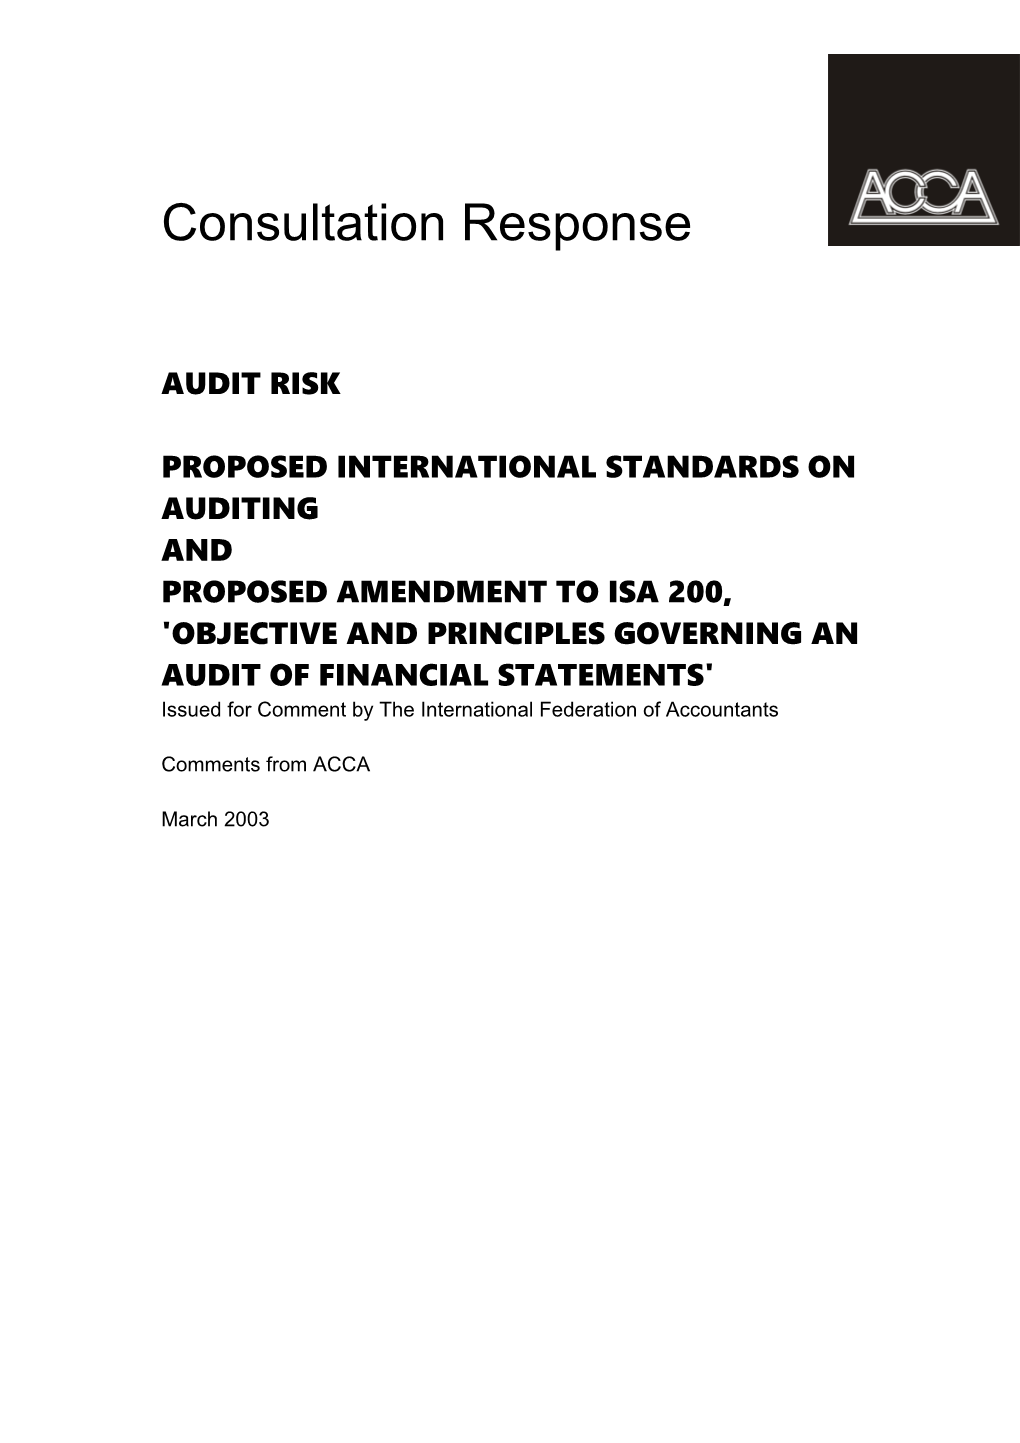 Proposed International Standards on Auditing